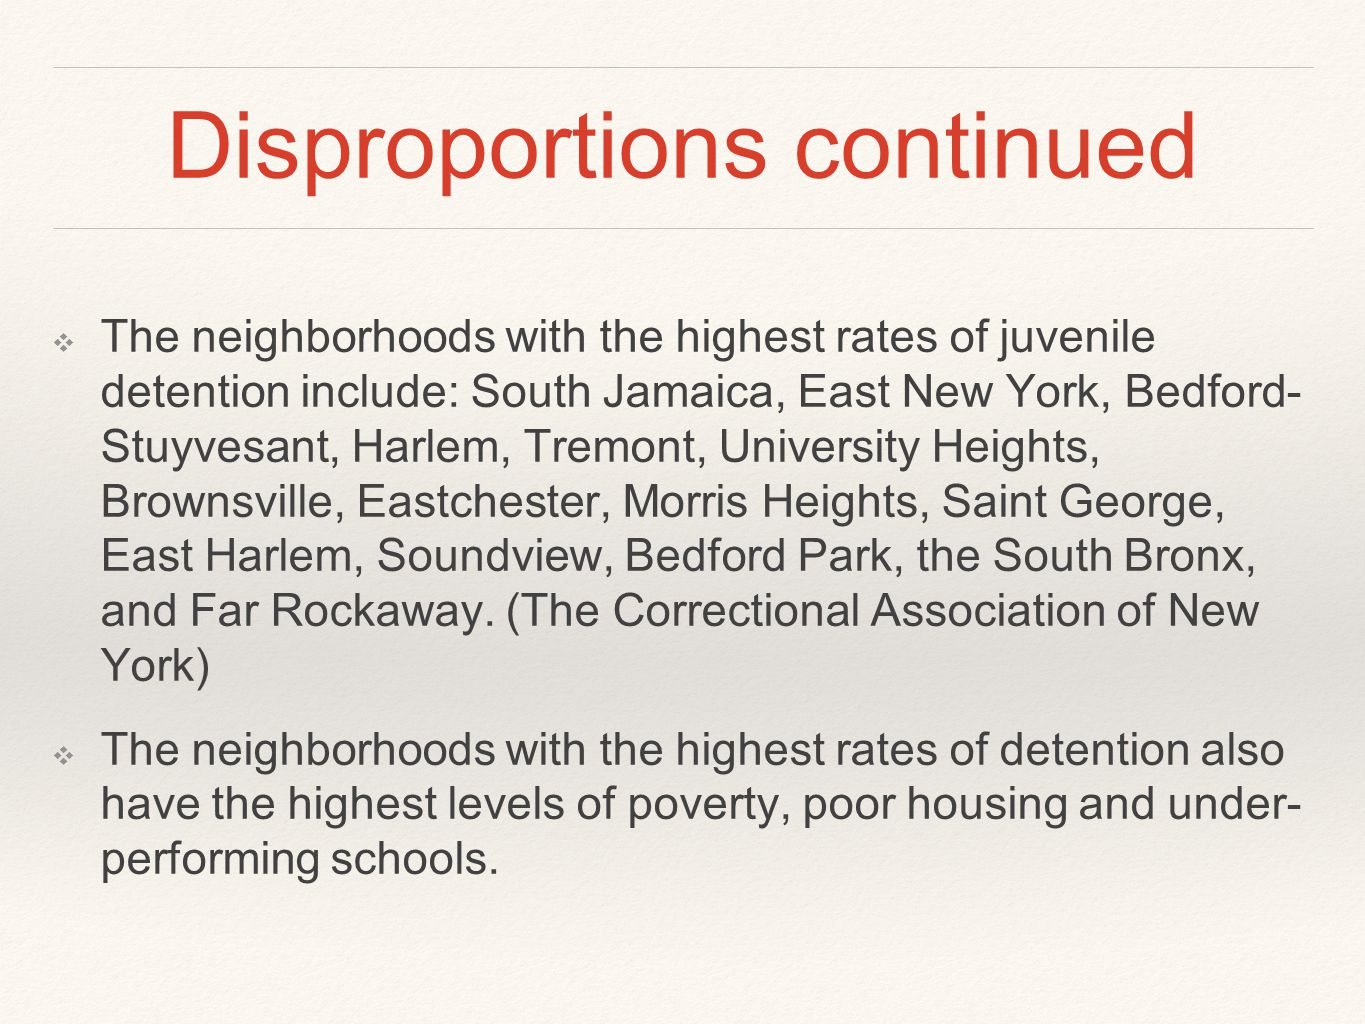 Disproportions continued ❖ The neighborhoods with the highest rates of juvenile detention include: South Jamaica, East New York, Bedford- Stuyvesant, Harlem, Tremont, University Heights, Brownsville, Eastchester, Morris Heights, Saint George, East Harlem, Soundview, Bedford Park, the South Bronx, and Far Rockaway.